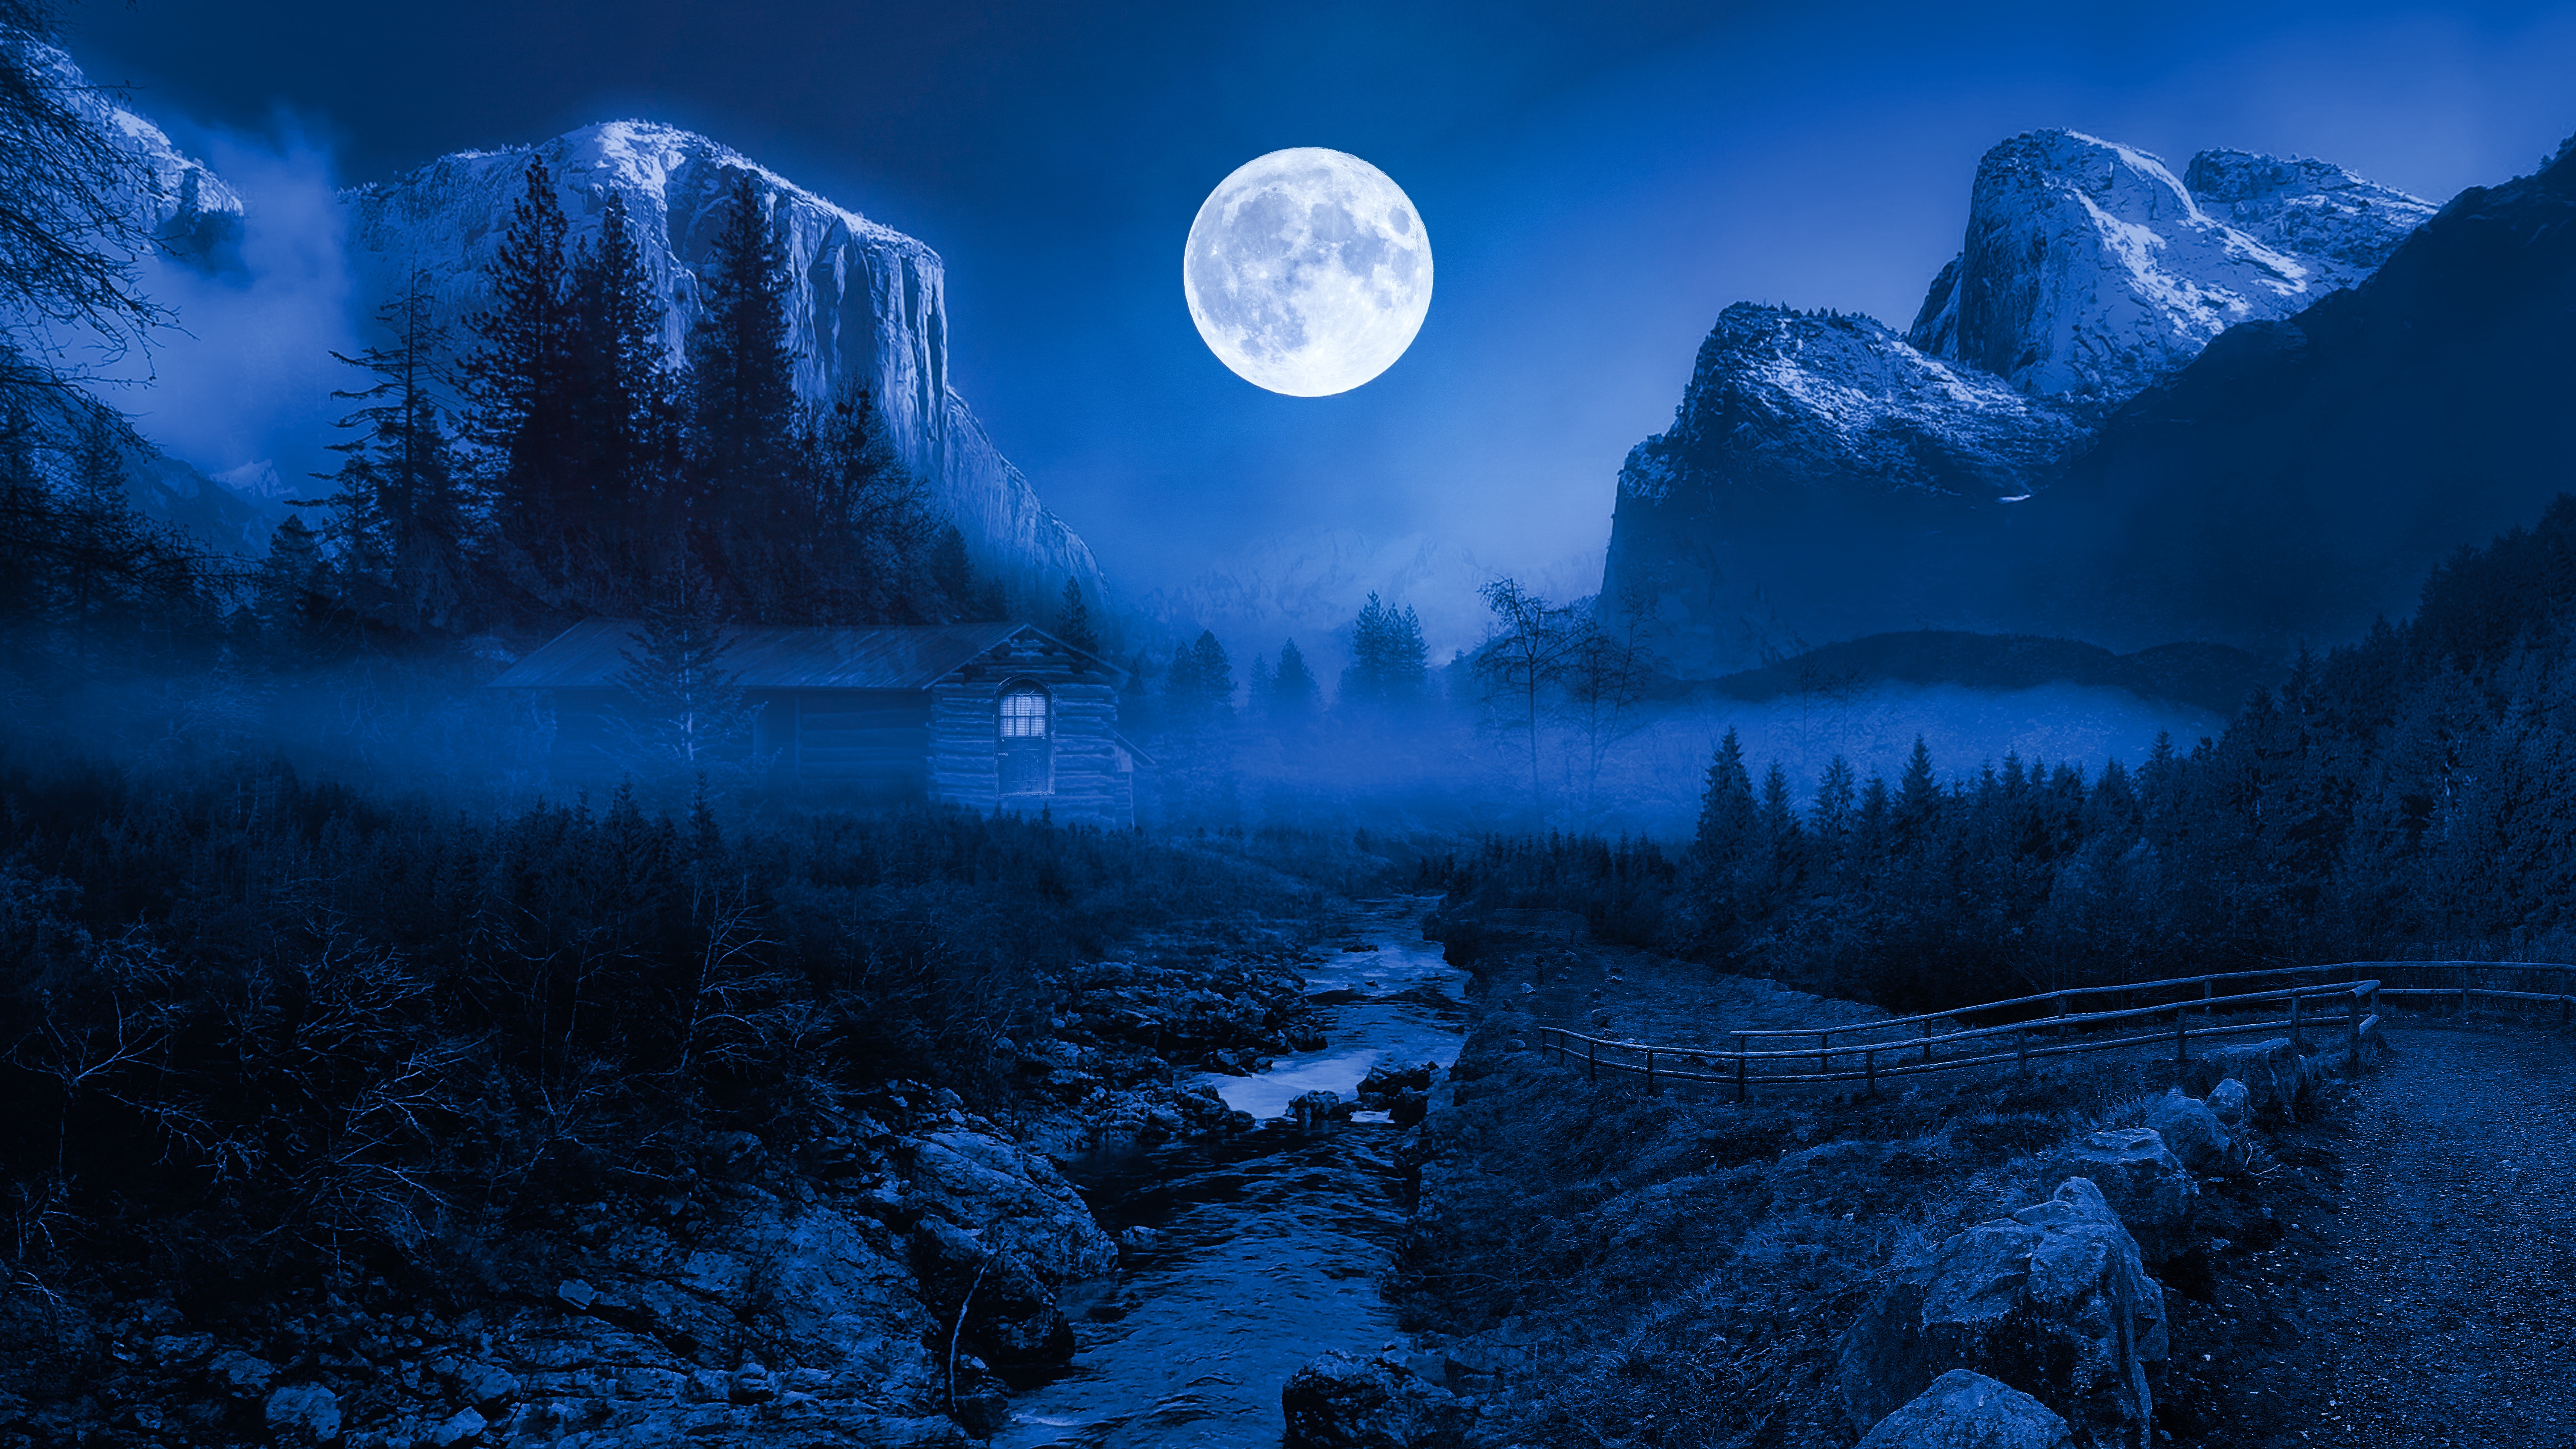 HD wallpaper, 8K, Water Stream, Twilight Moon, Forest, 5K, Camping, Adventure, Night Time, Wooden House, Landscape, Mountain